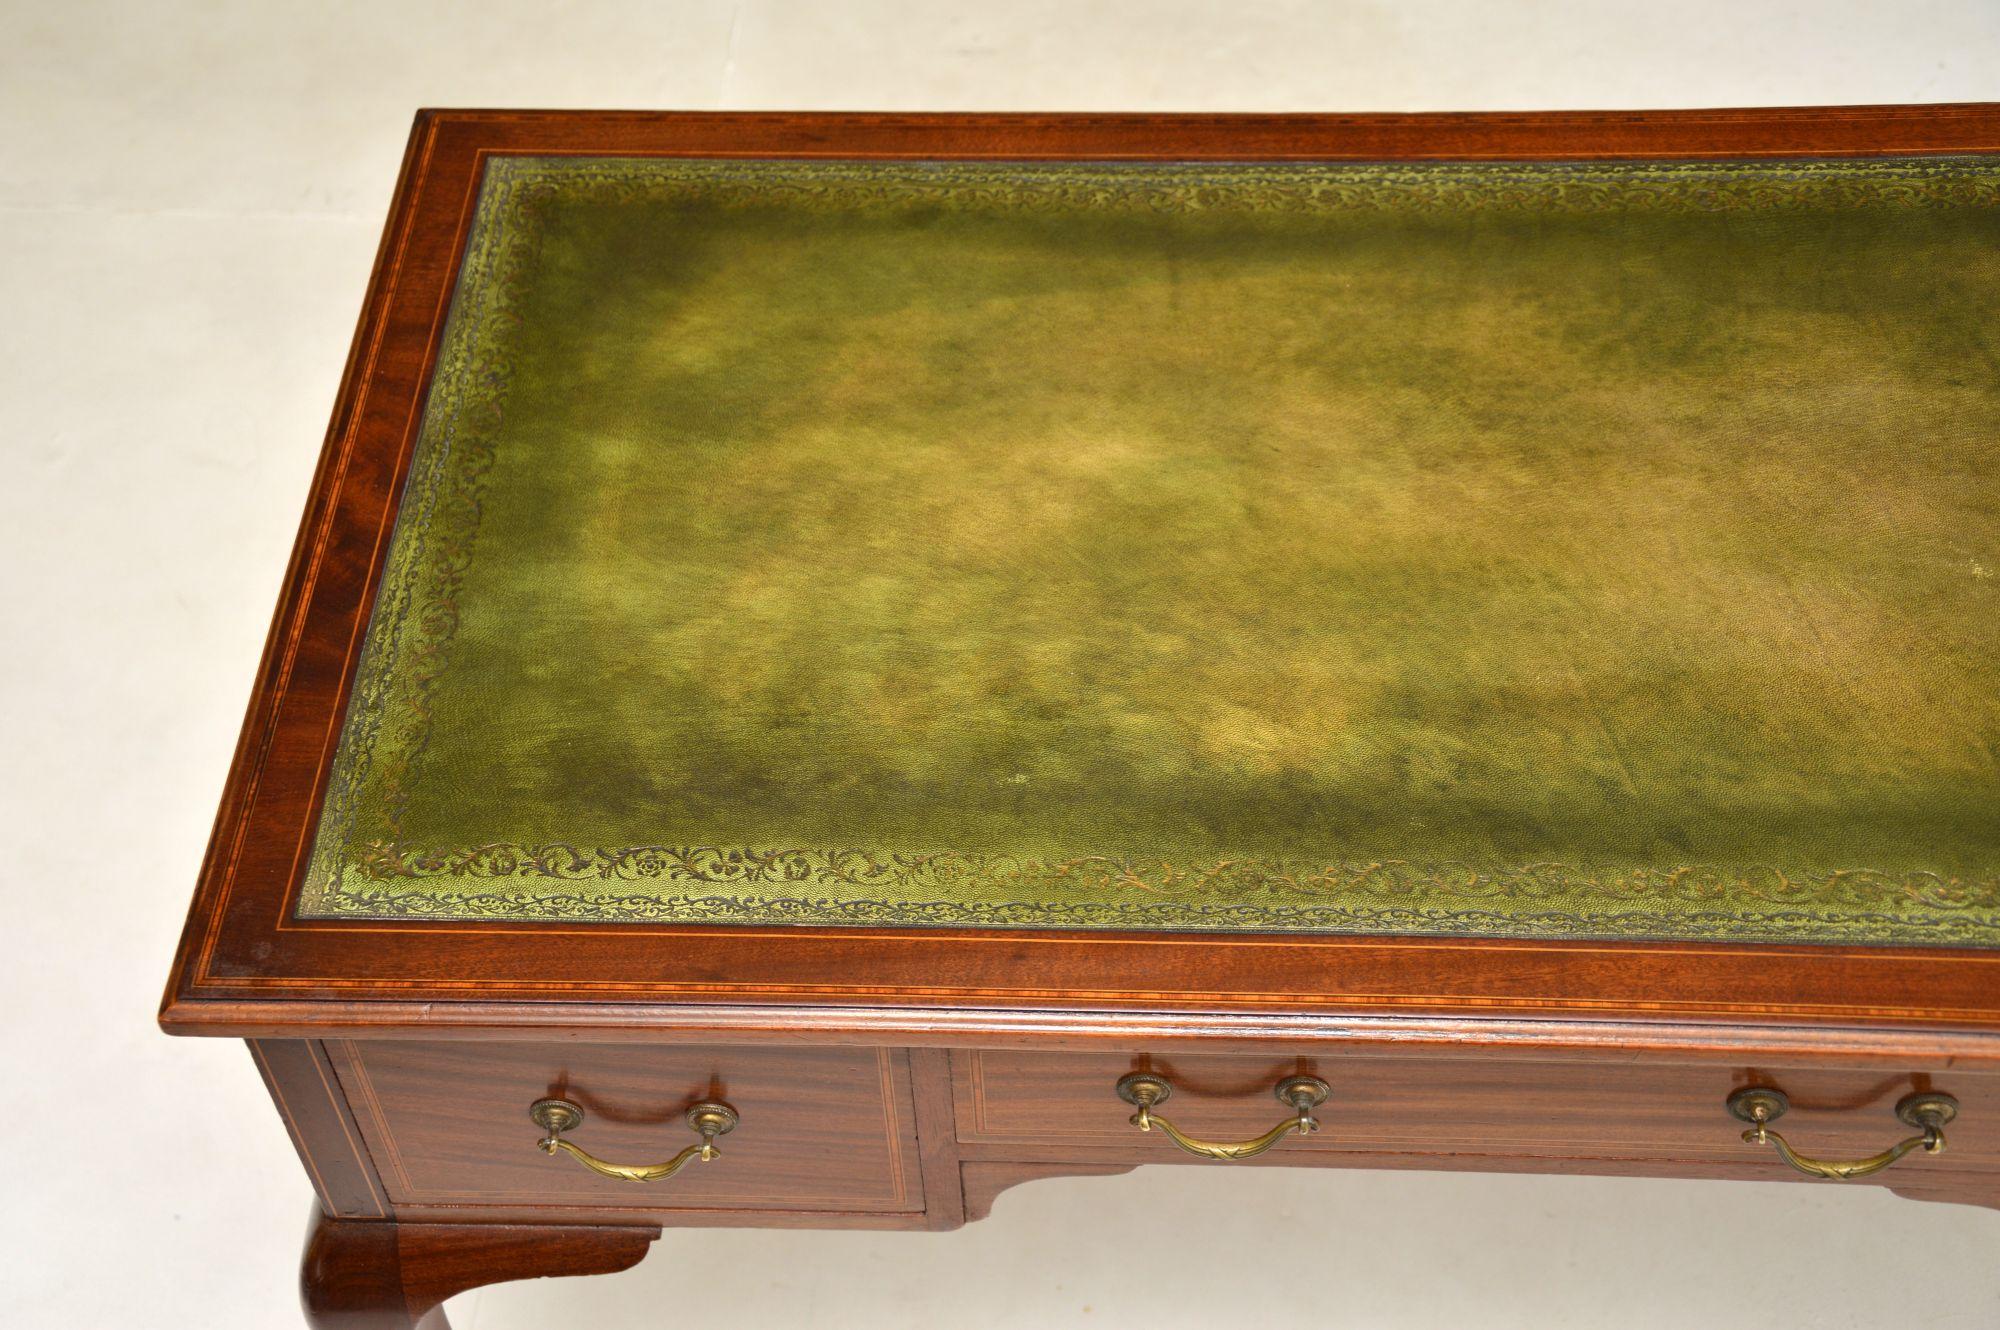 Leather Antique Edwardian Inlaid Desk by Maple & Co For Sale